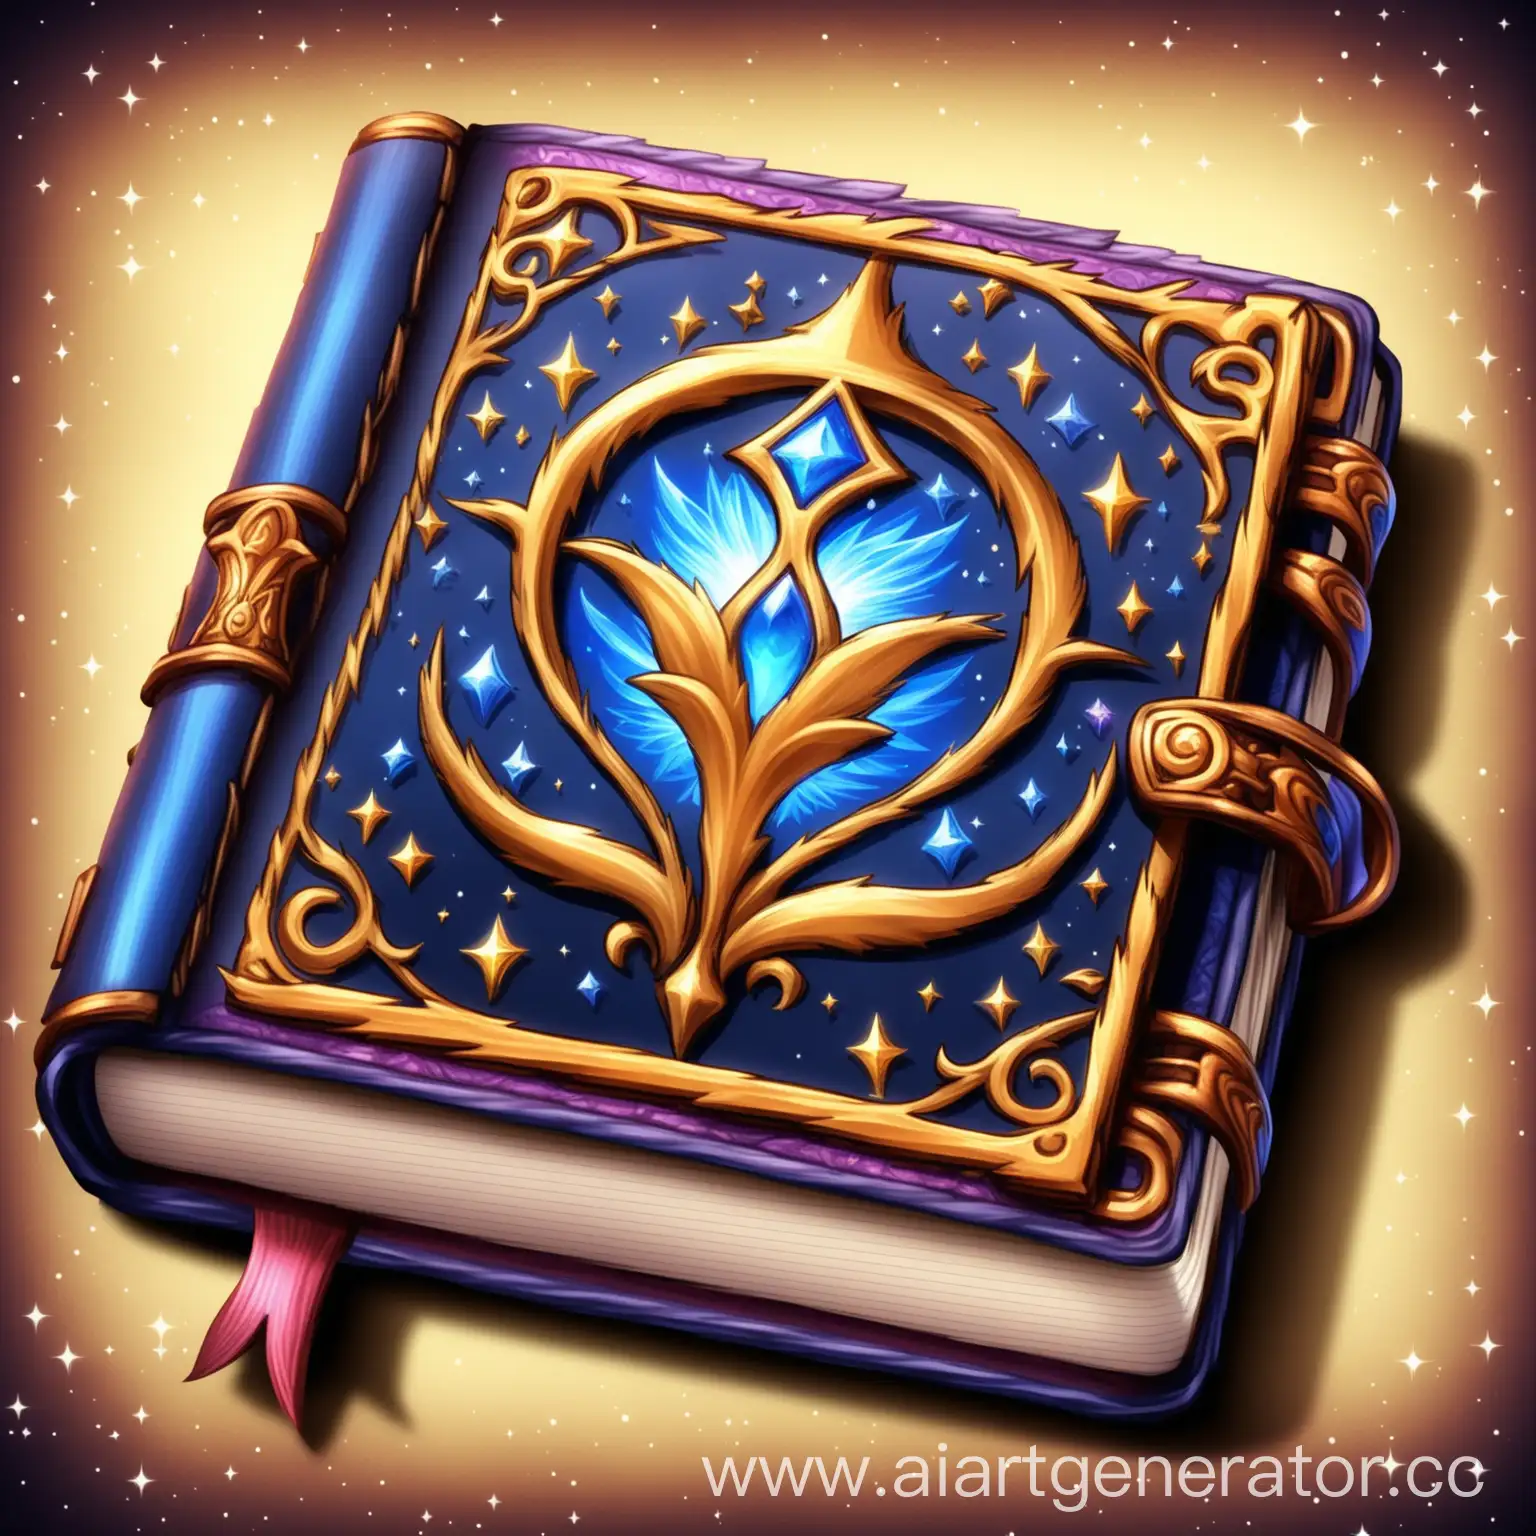 Enchanted-Icon-with-Open-Diary-Fantasy-Style-Inspiration